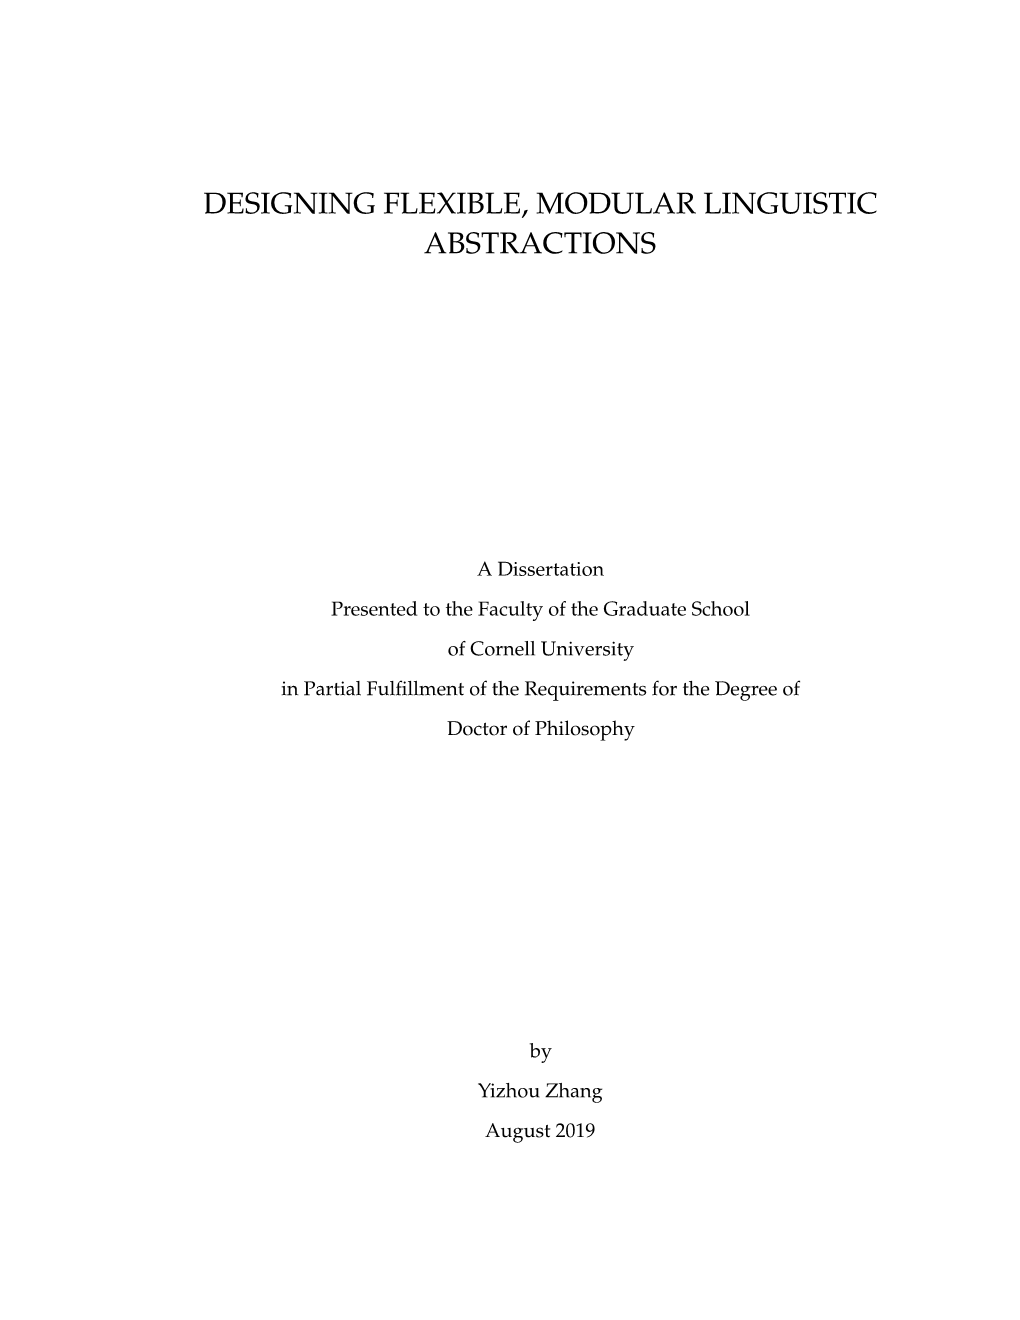 Dissertation Presented to the Faculty of the Graduate School of Cornell University